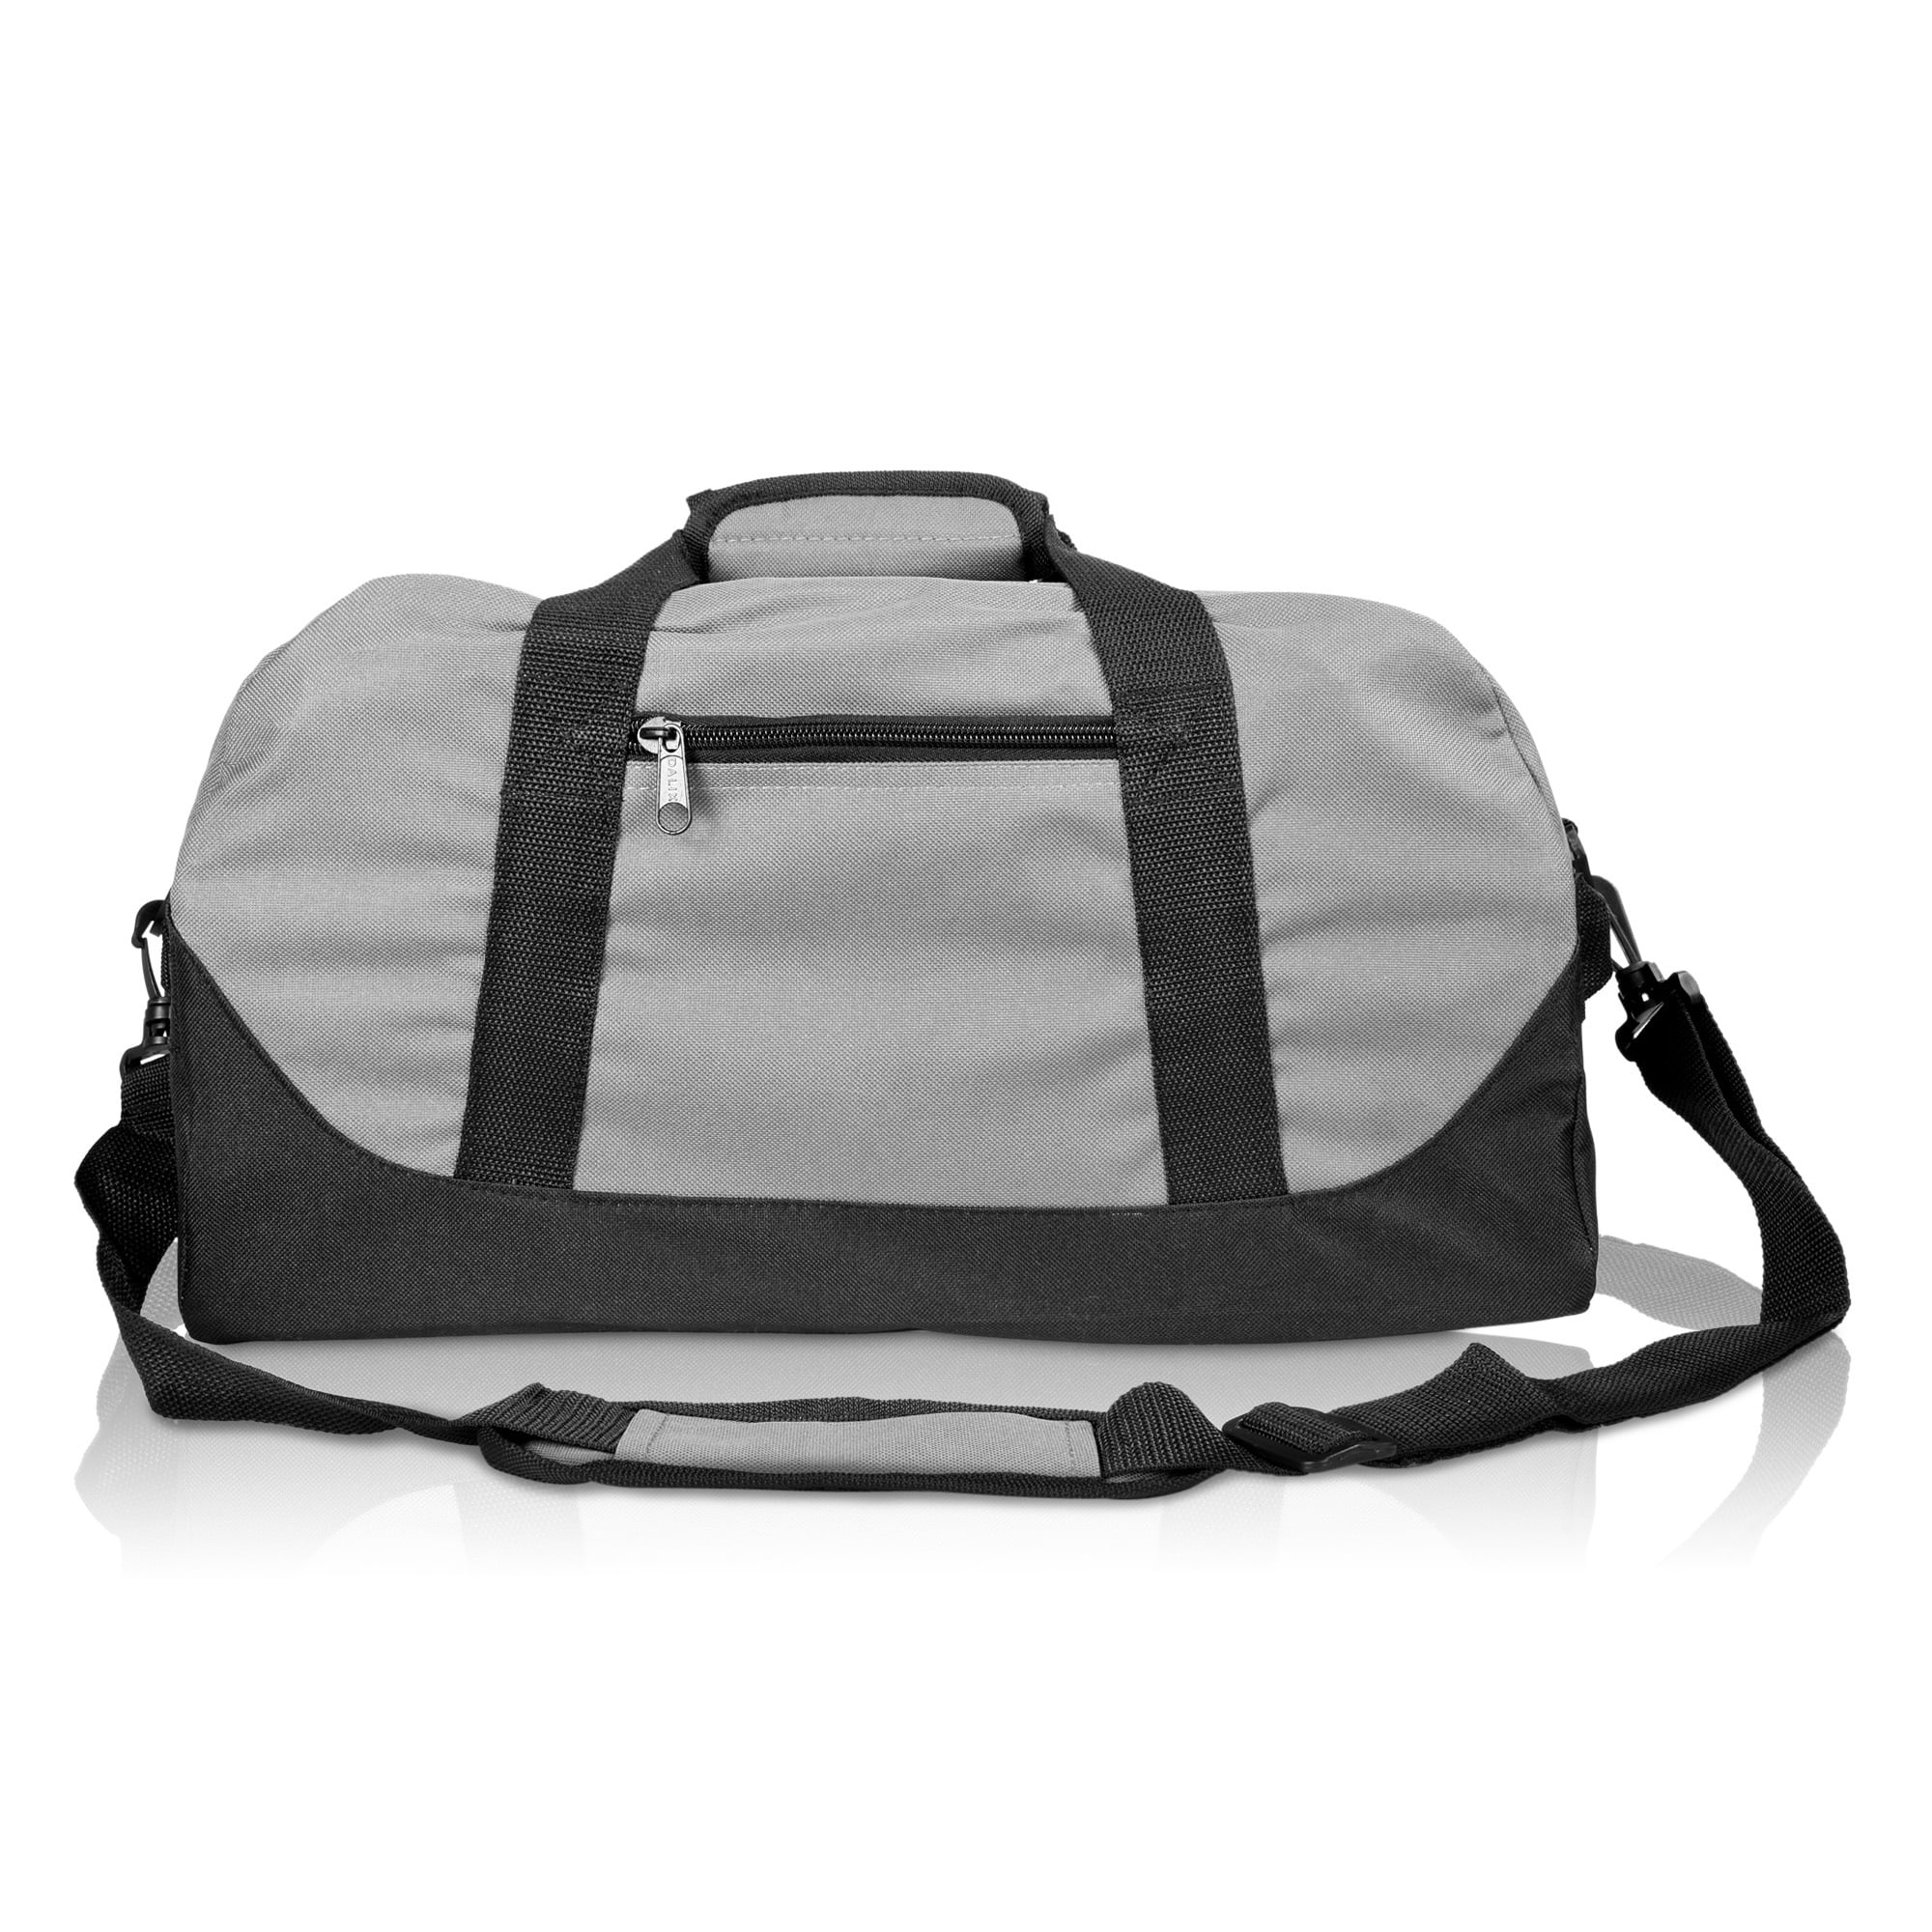 DALIX 21" Large Duffle Bag Sports Gym Ditty Bag Traveling Kit Bag in Gray Duffle 